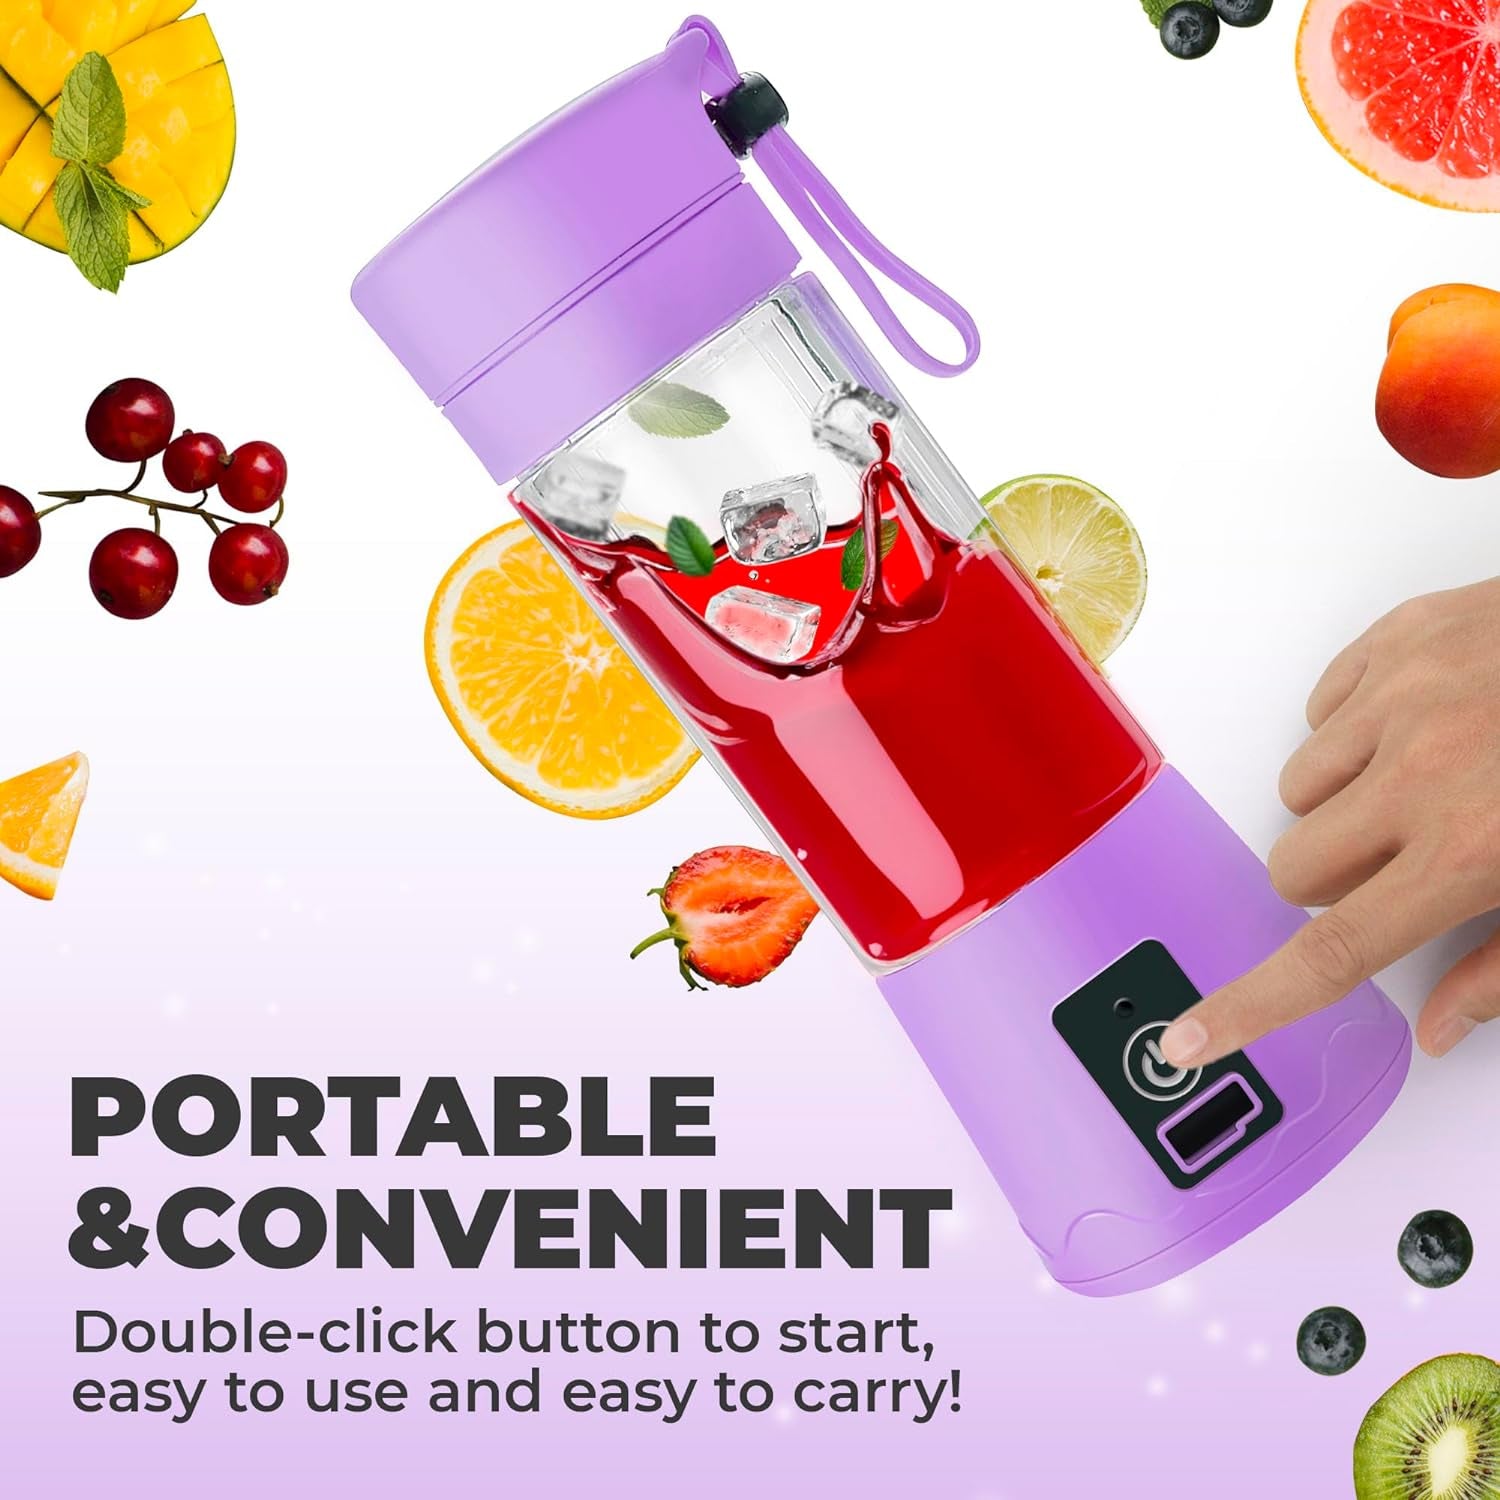 Portable Blender - Compact and USB Rechargeable Personal Travel Blenders for Smoothies, Shakes and Ice - Mini Fruit Juice Mixing Shaker Bottle - 380Ml, Purple  Nomadic Outpost   